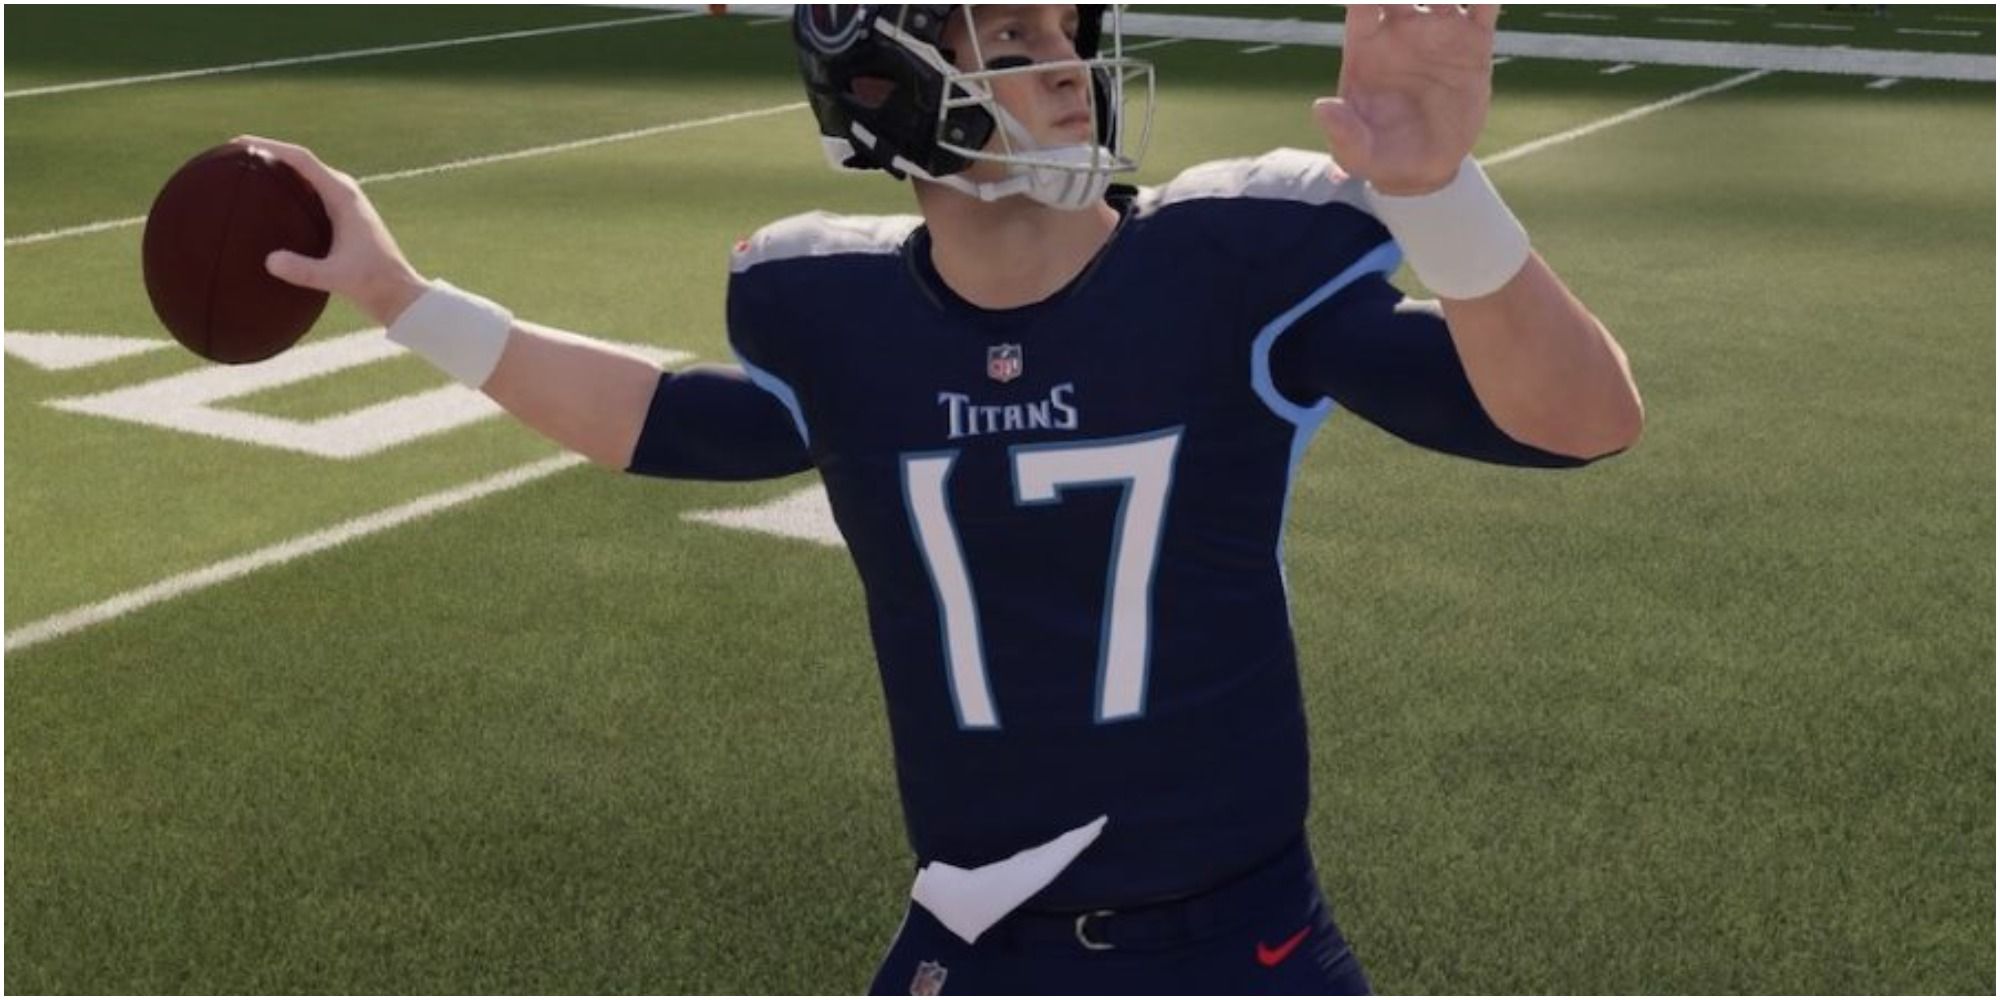 Madden NFL 22 Ryan Tannehill About To Throw Long